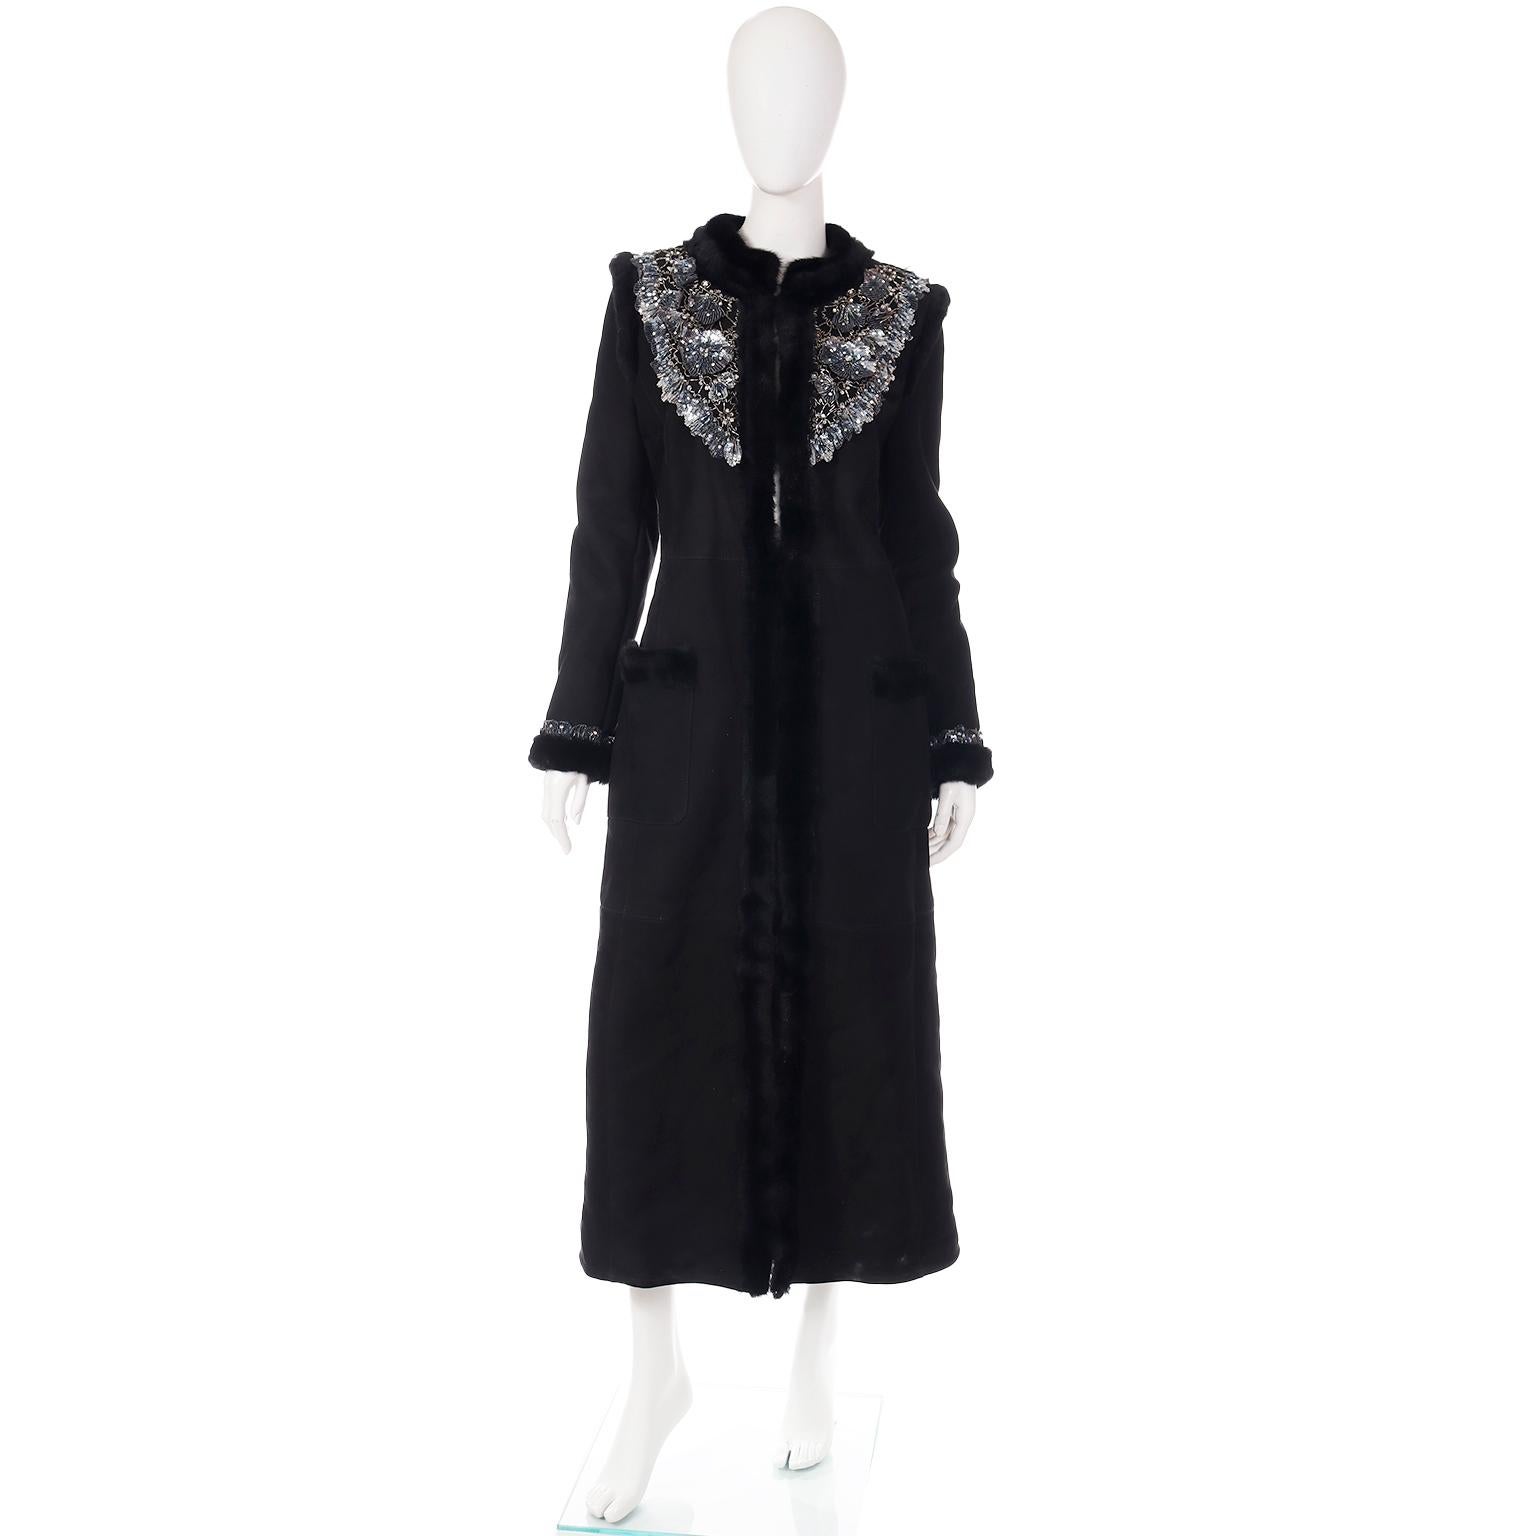 This sensational vintage coat is from Valentino Garavani's last F/W runway show in 2007. Valentino's final bow was after his Spring shows in 2008. This stunning coat was featured on the Fall/Winter runway and is truly a collector's piece. The coat